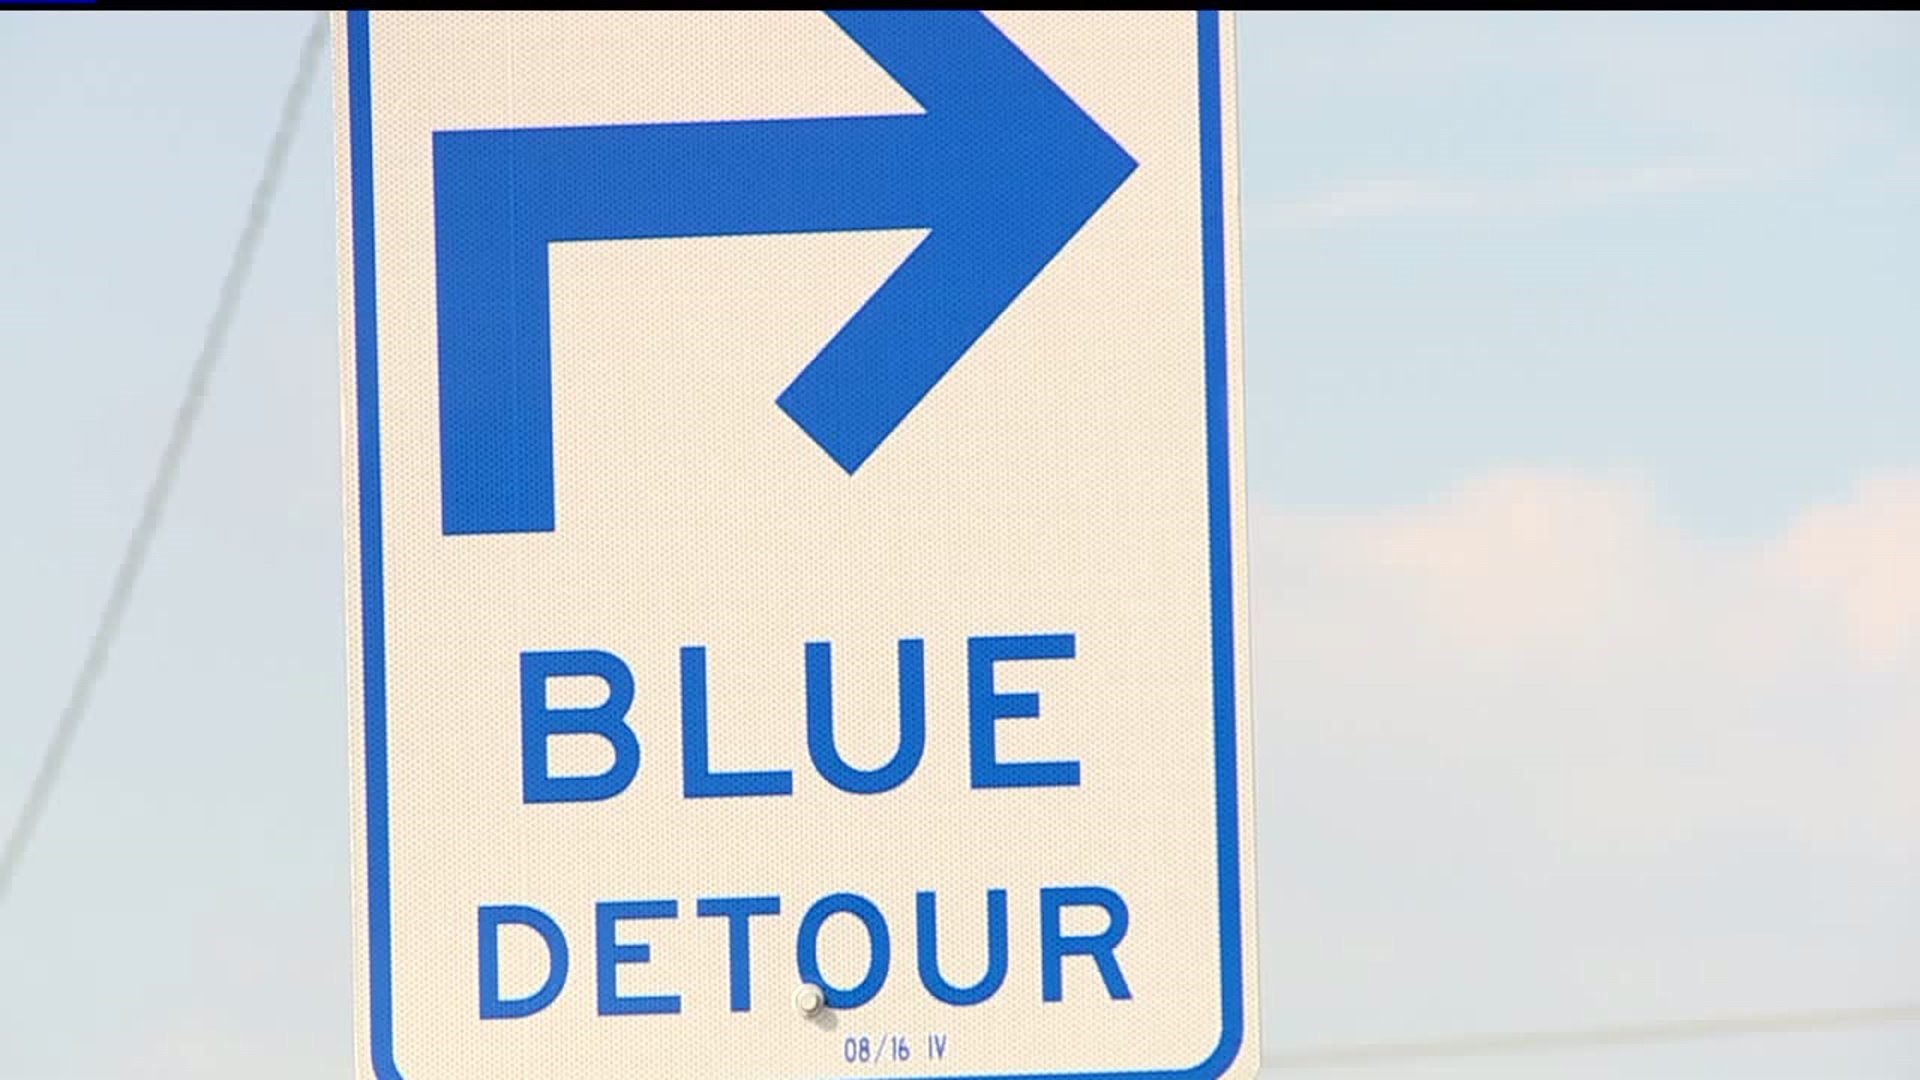 `Ask Evan`: "Why are there colored detour signs located near interstates?"